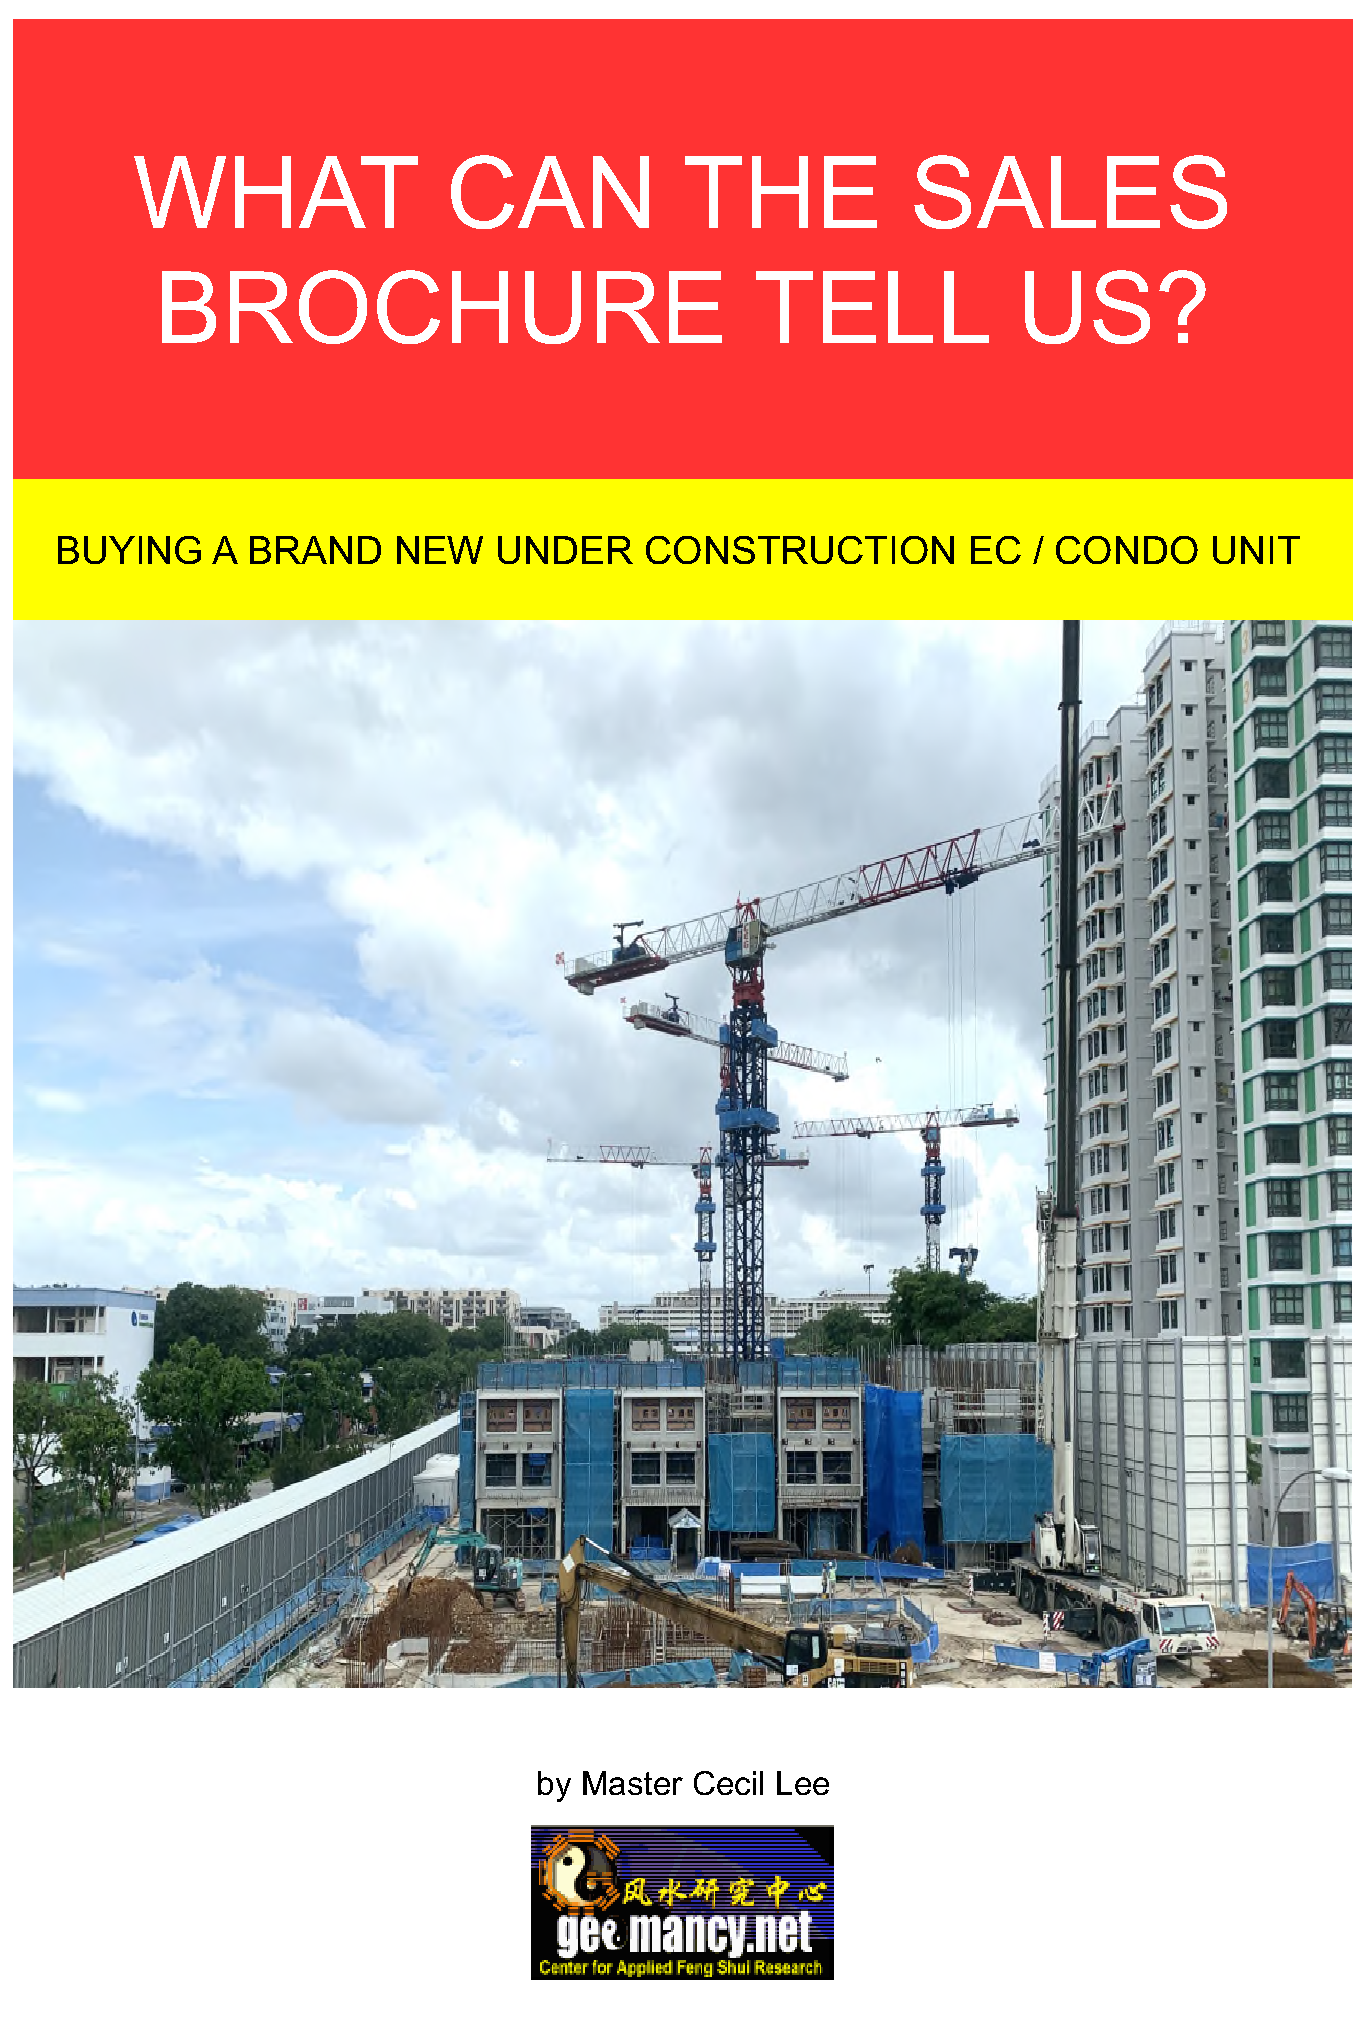 2020: What can the sales brochure tell us about buying a new brand new under construction EC/Condo Unit